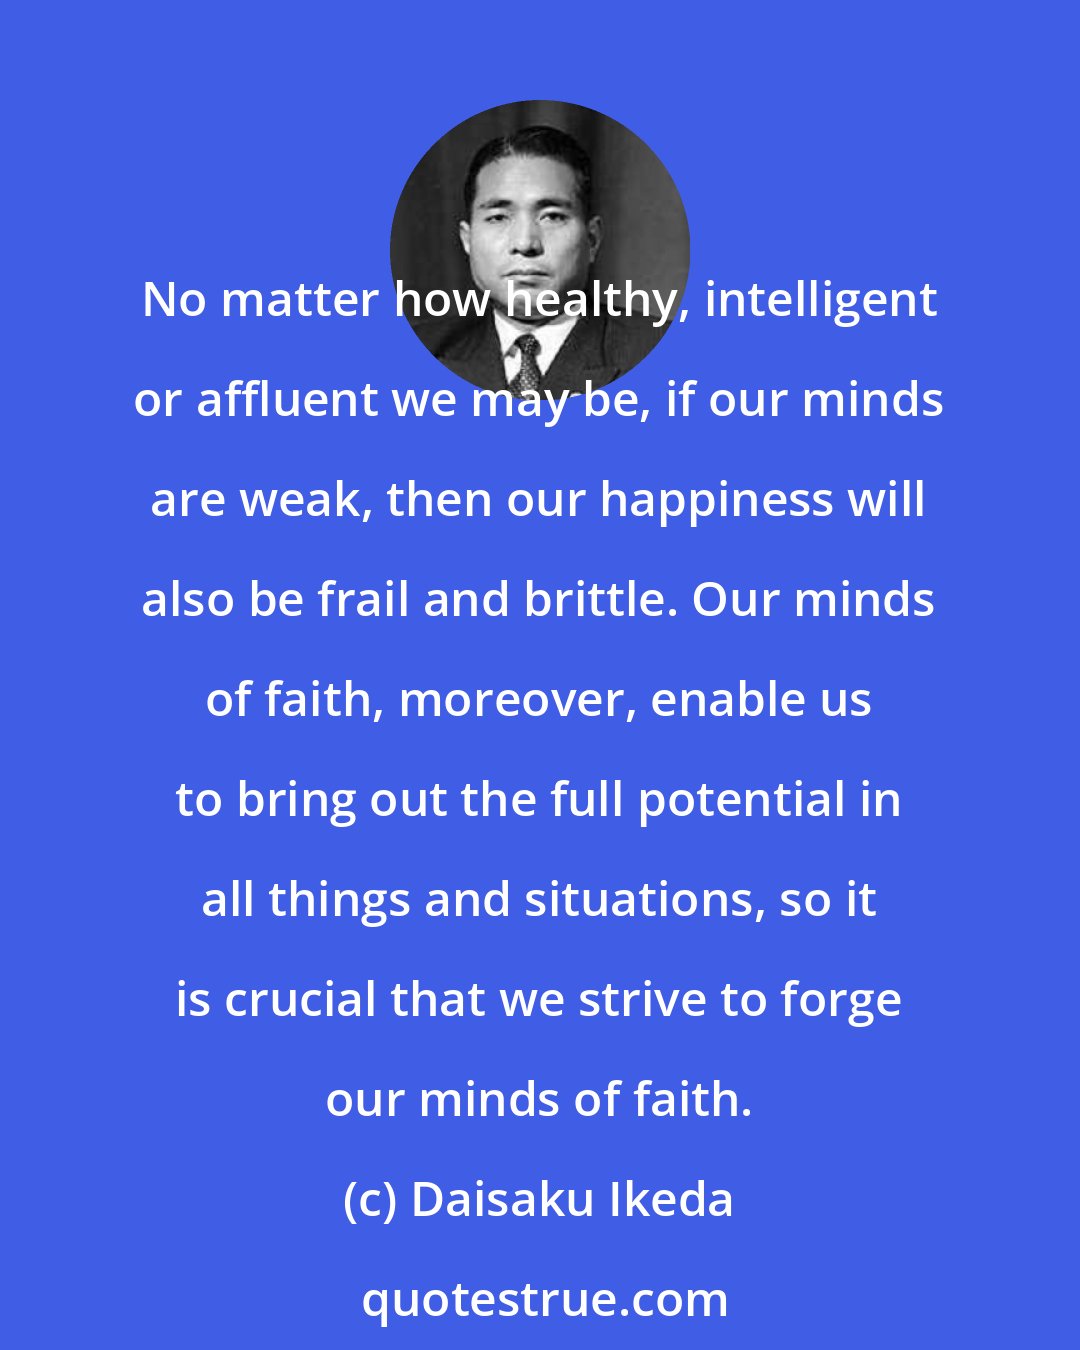 Daisaku Ikeda: No matter how healthy, intelligent or affluent we may be, if our minds are weak, then our happiness will also be frail and brittle. Our minds of faith, moreover, enable us to bring out the full potential in all things and situations, so it is crucial that we strive to forge our minds of faith.